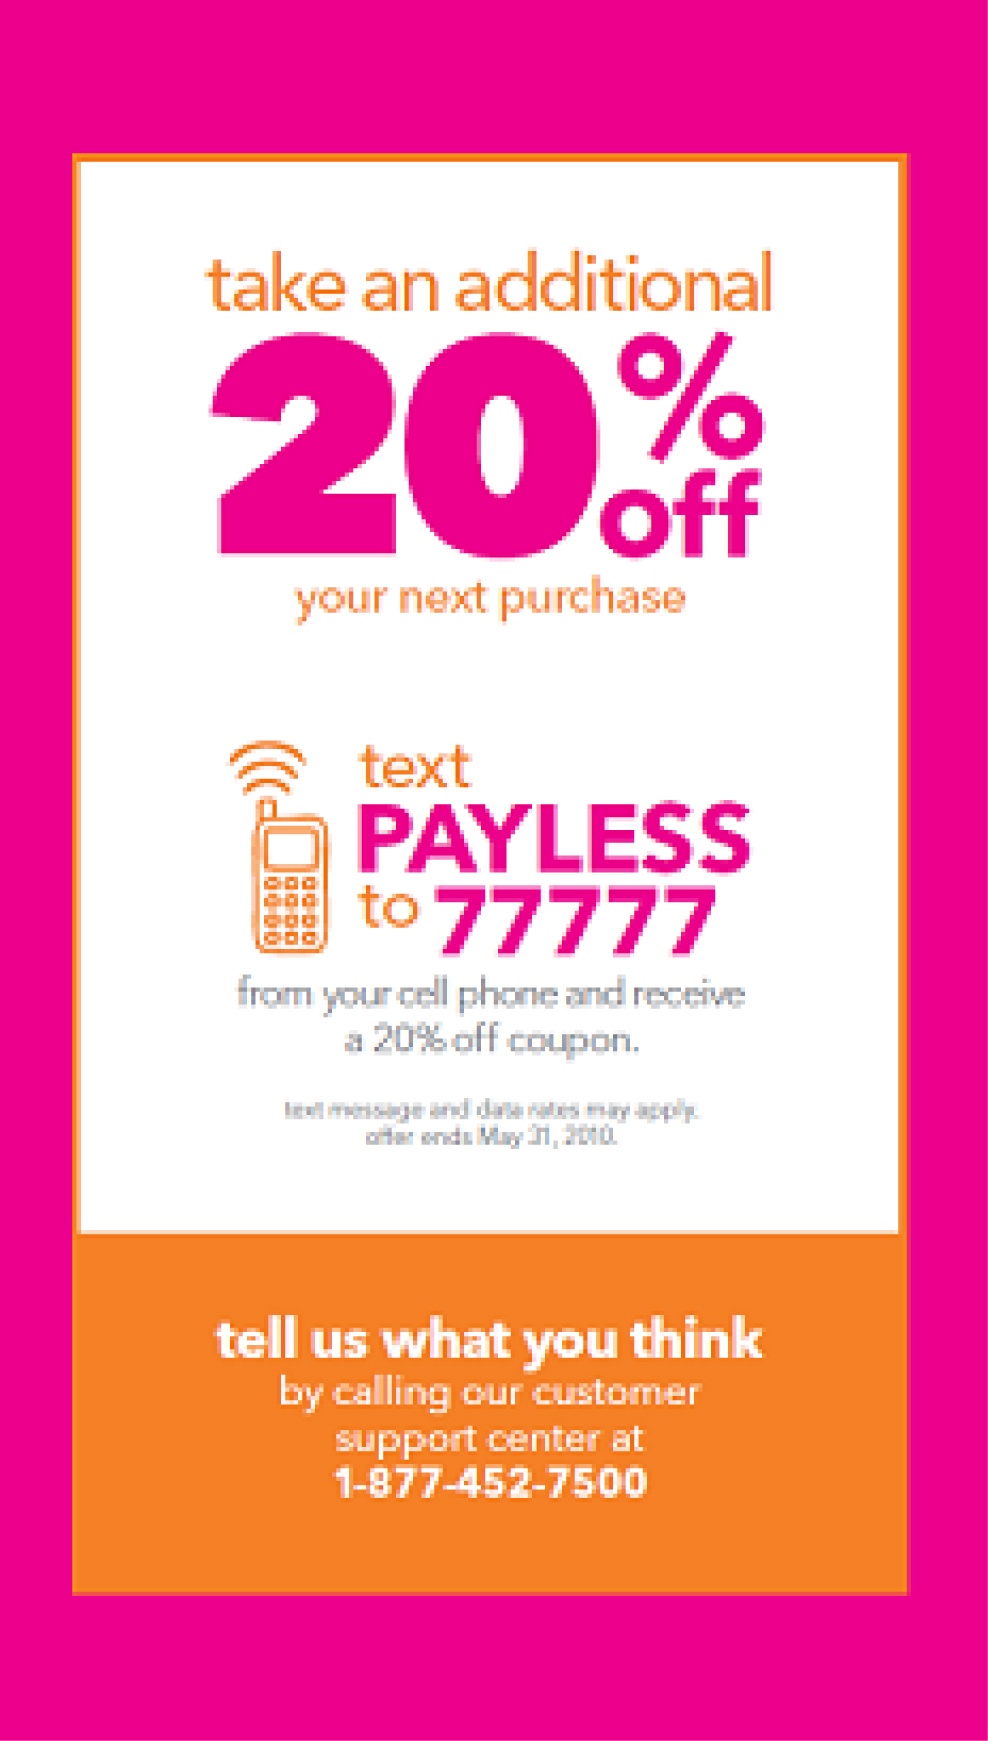 payless shoesource has apparently democratized fashion how you may ask